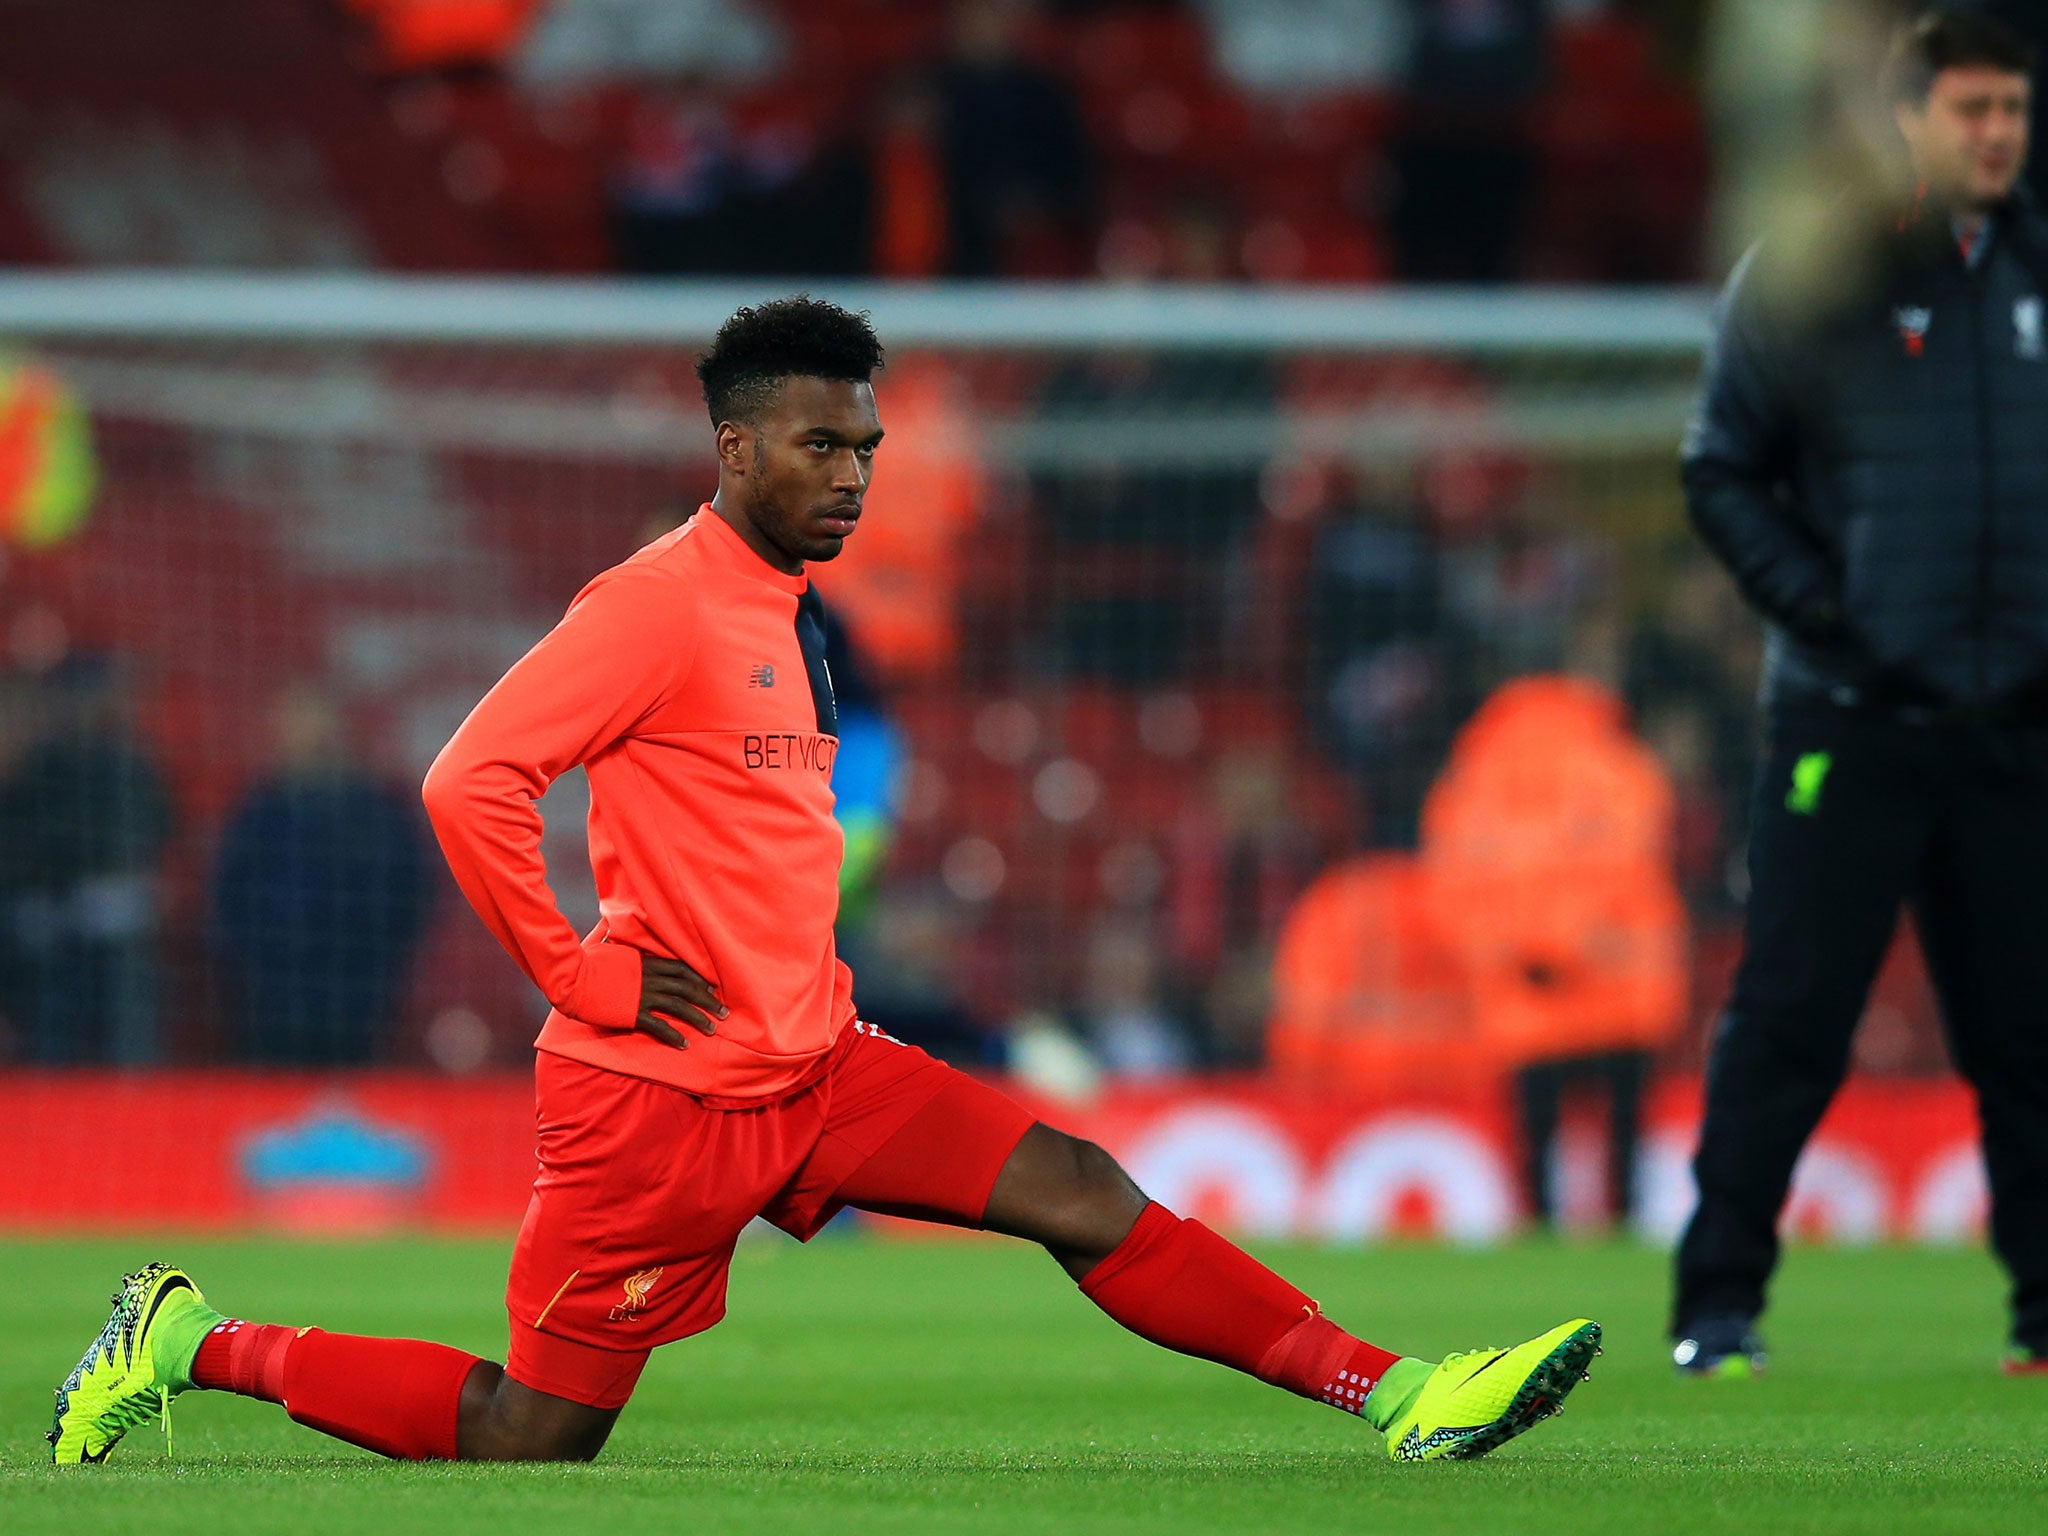 Sturridge has managed just four starts for Liverpool this season